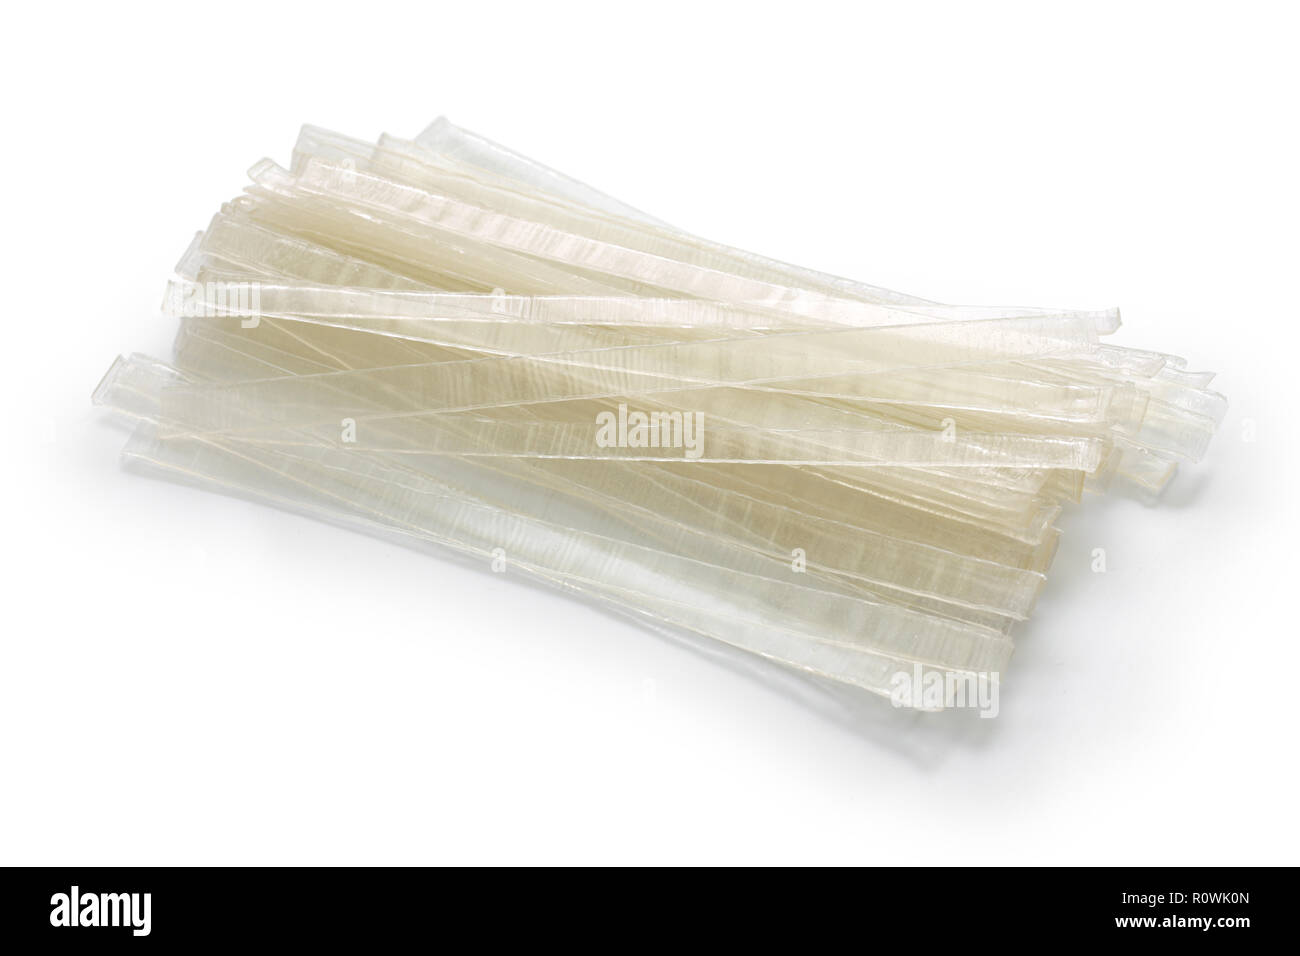 dried fenpi, green bean sheet jelly noodles, chinese food ingredient Stock Photo